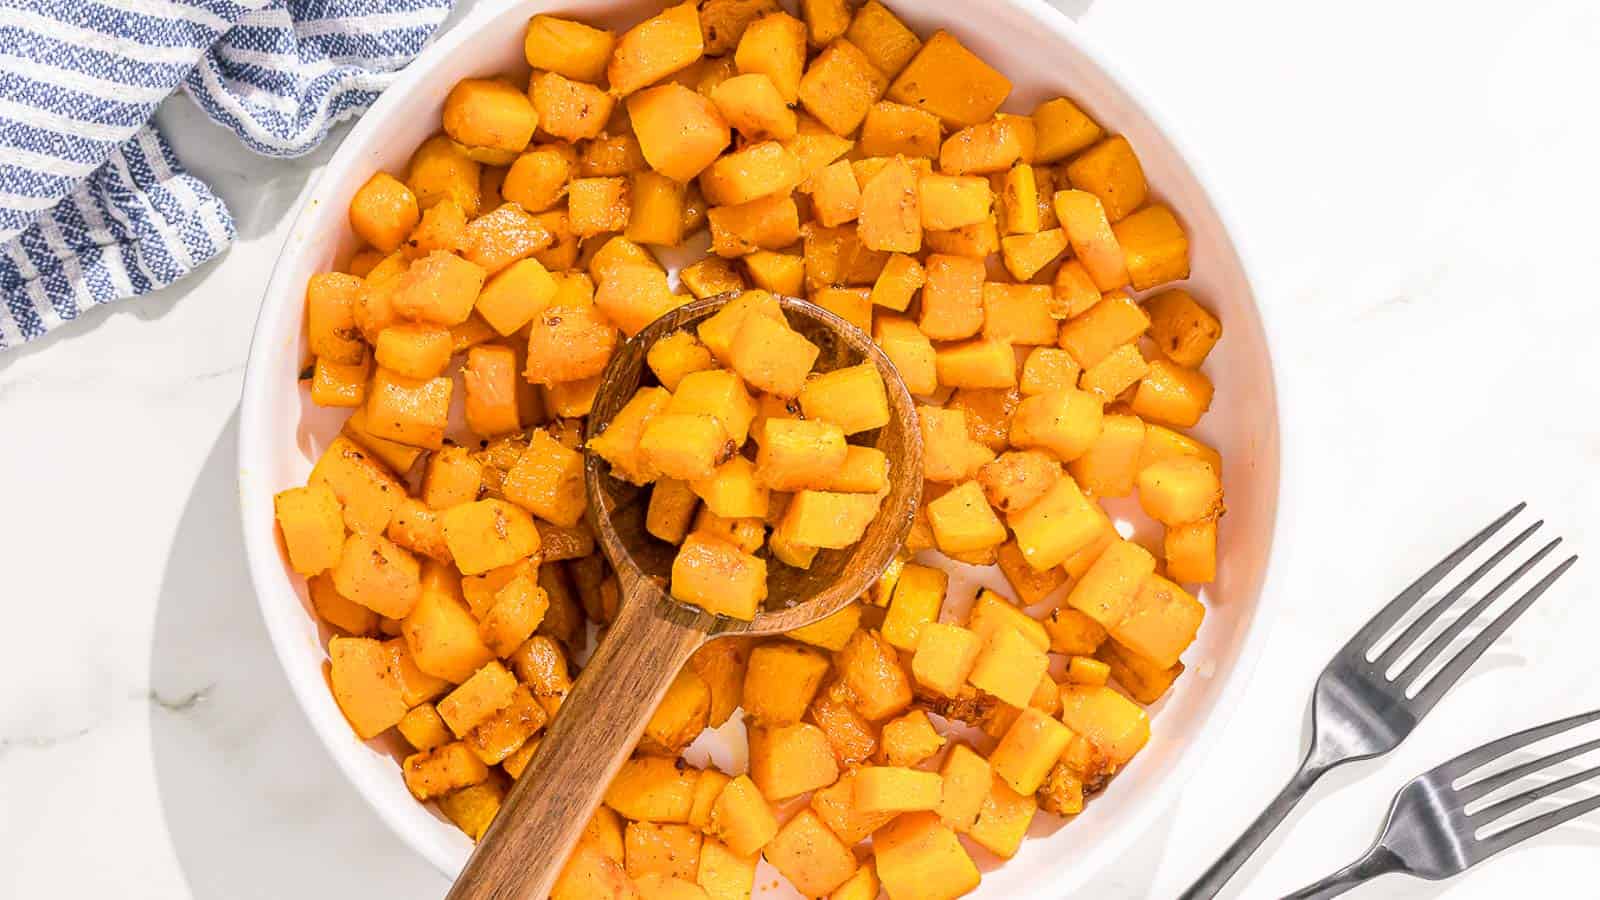 Sauteed butternut squash in a stainless steel pan.